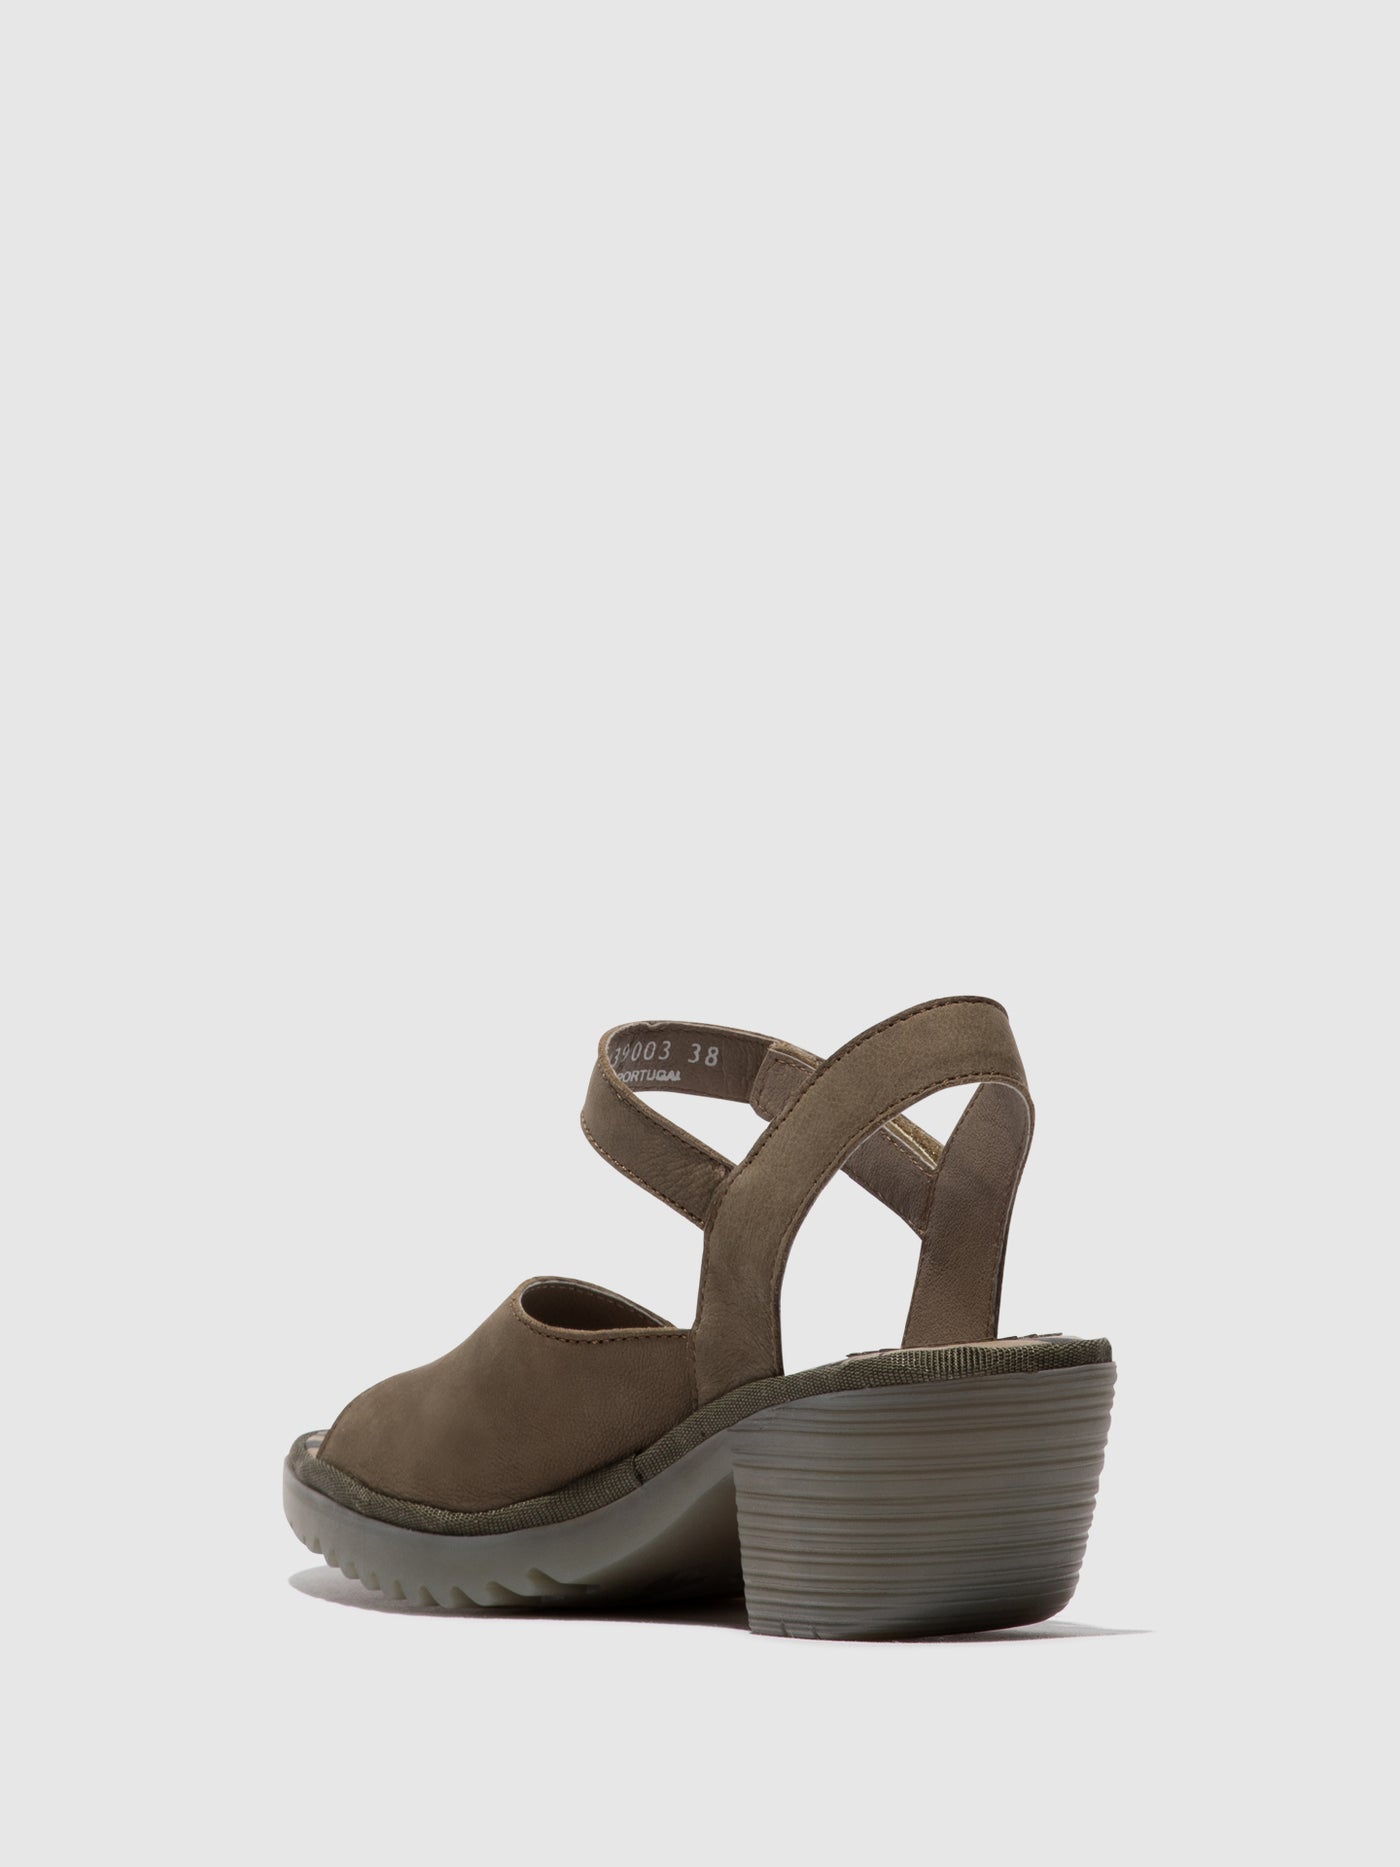 Sling-Back Sandals WELY439FLY KHAKI